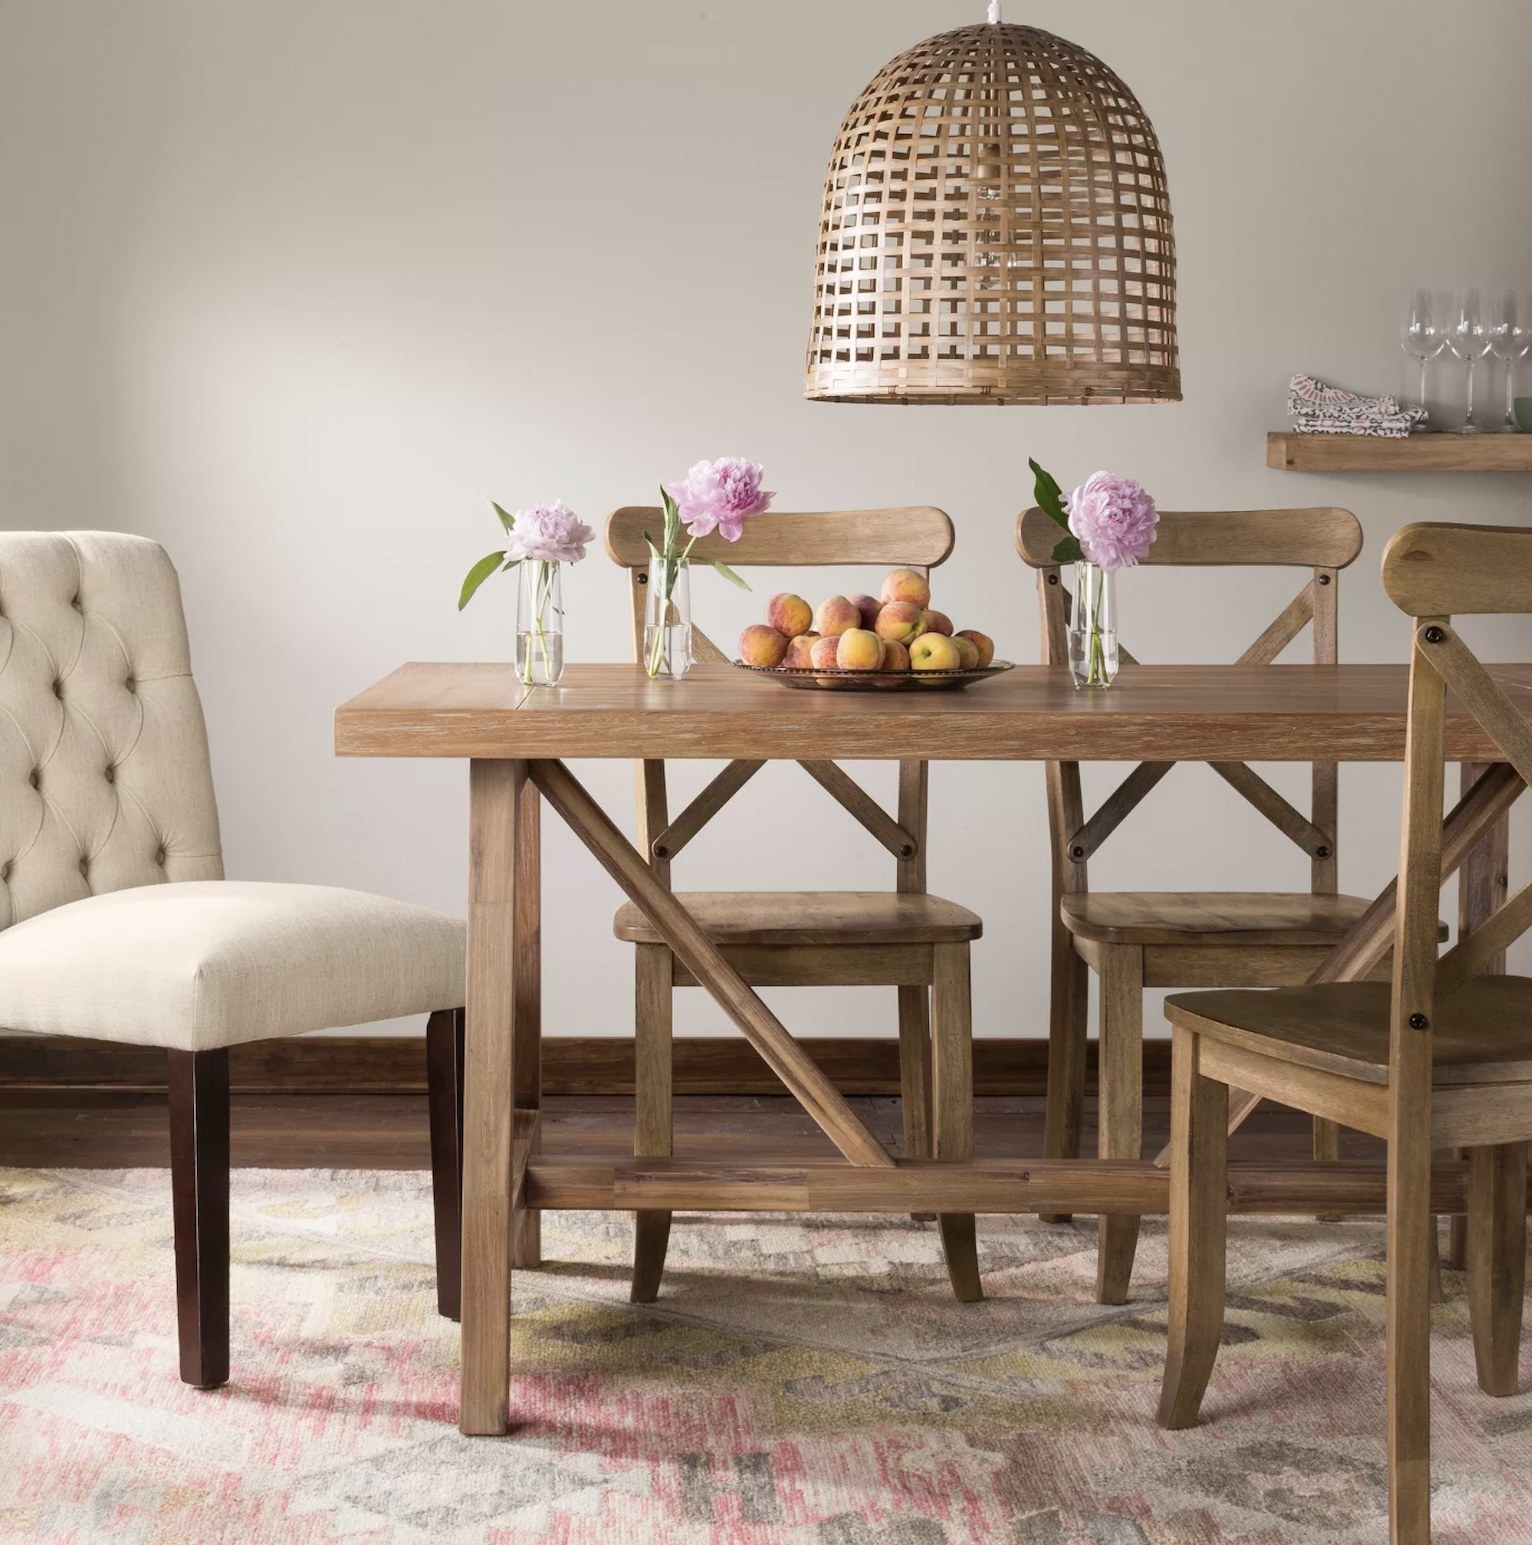 The wooden dining table